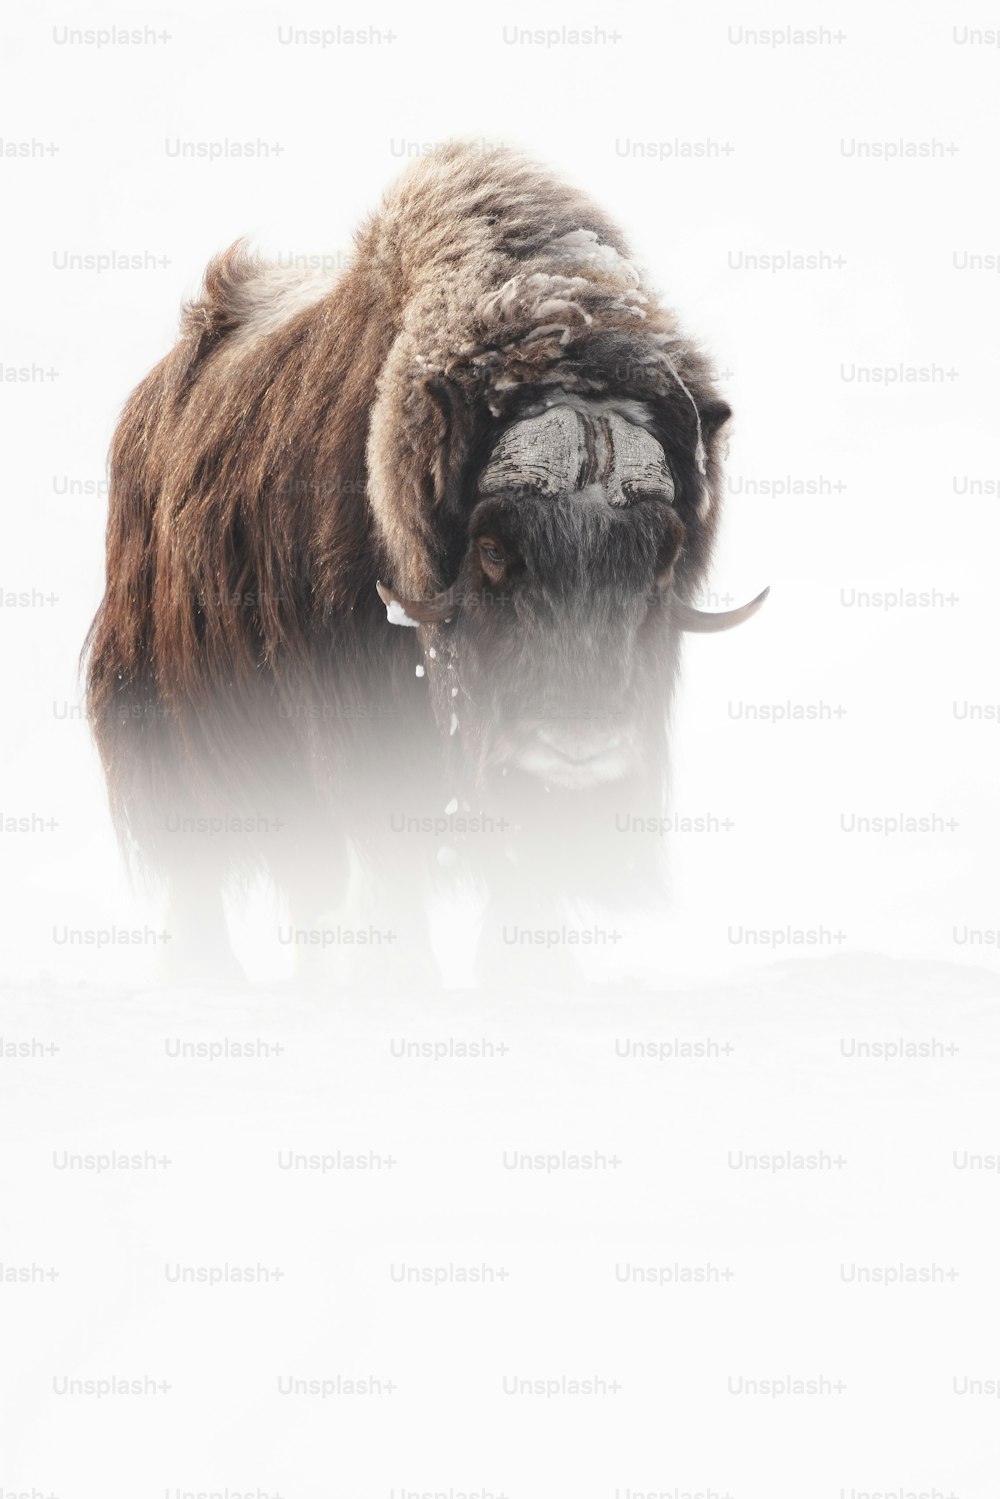 Wild Animal Images  Free HD Backgrounds, PNGs, Vectors & Illustrations -  rawpixel